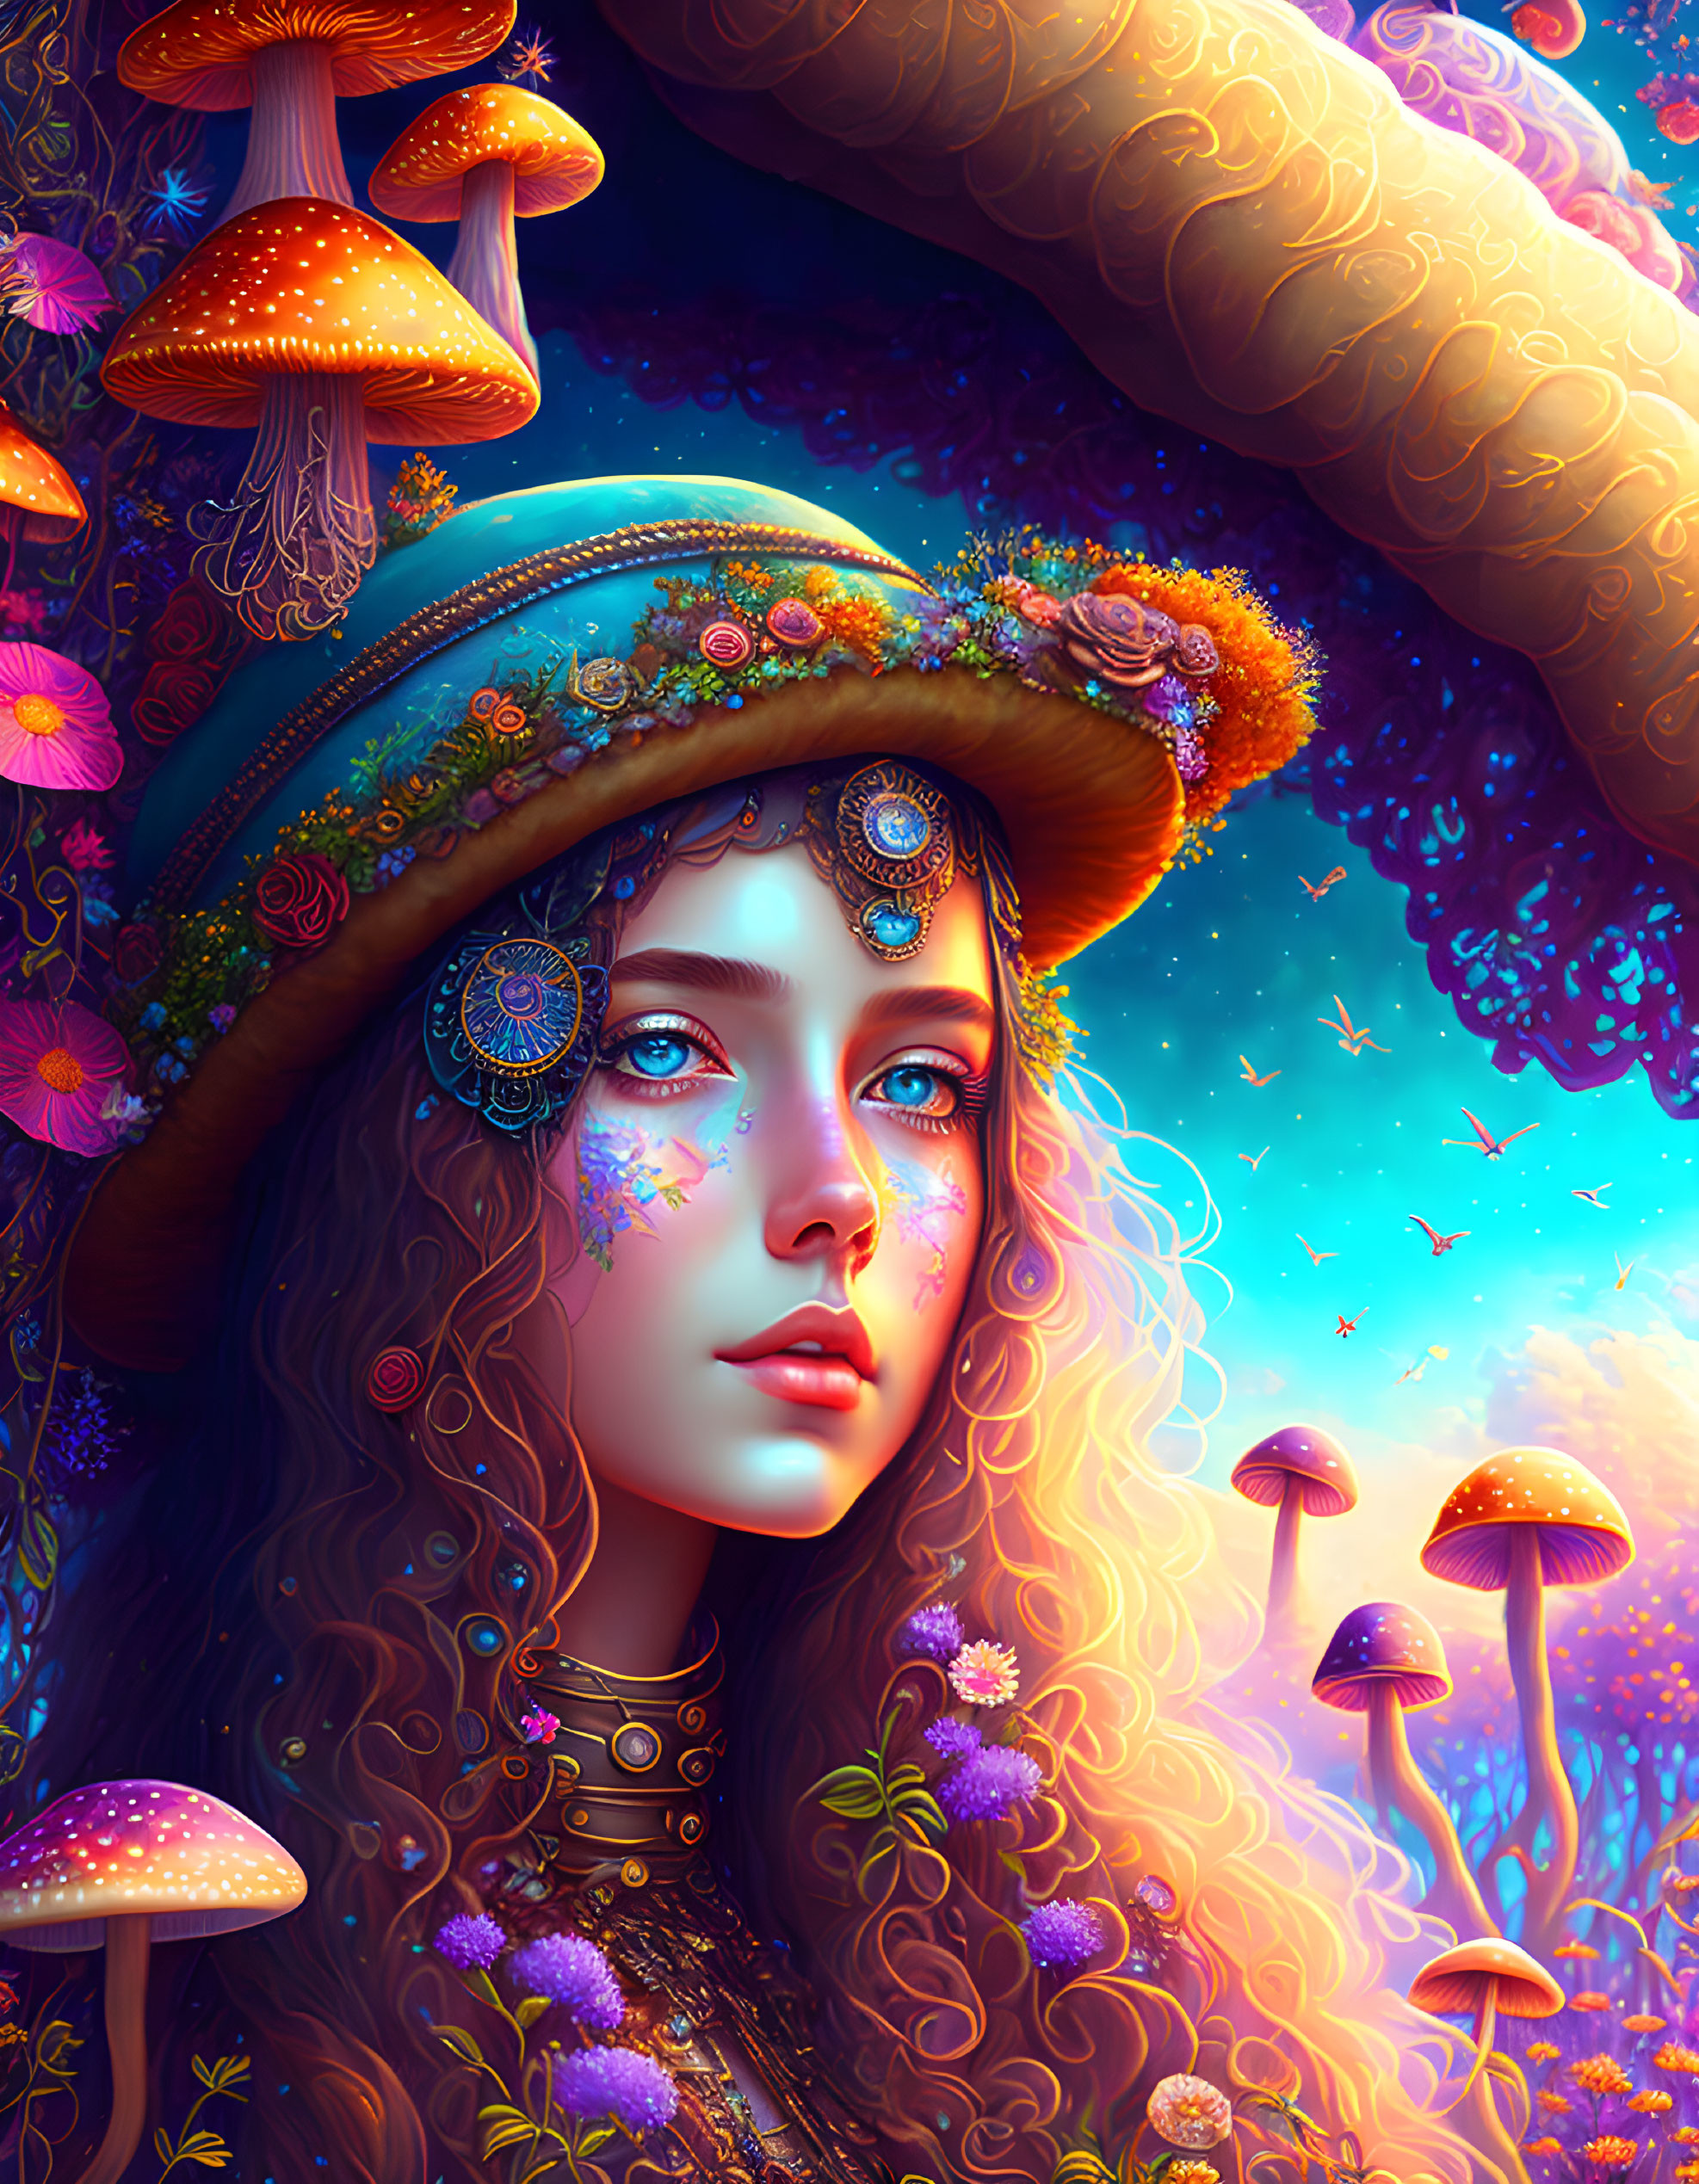 Colorful Woman with Mushrooms, Stars, Flowers, and Jewels